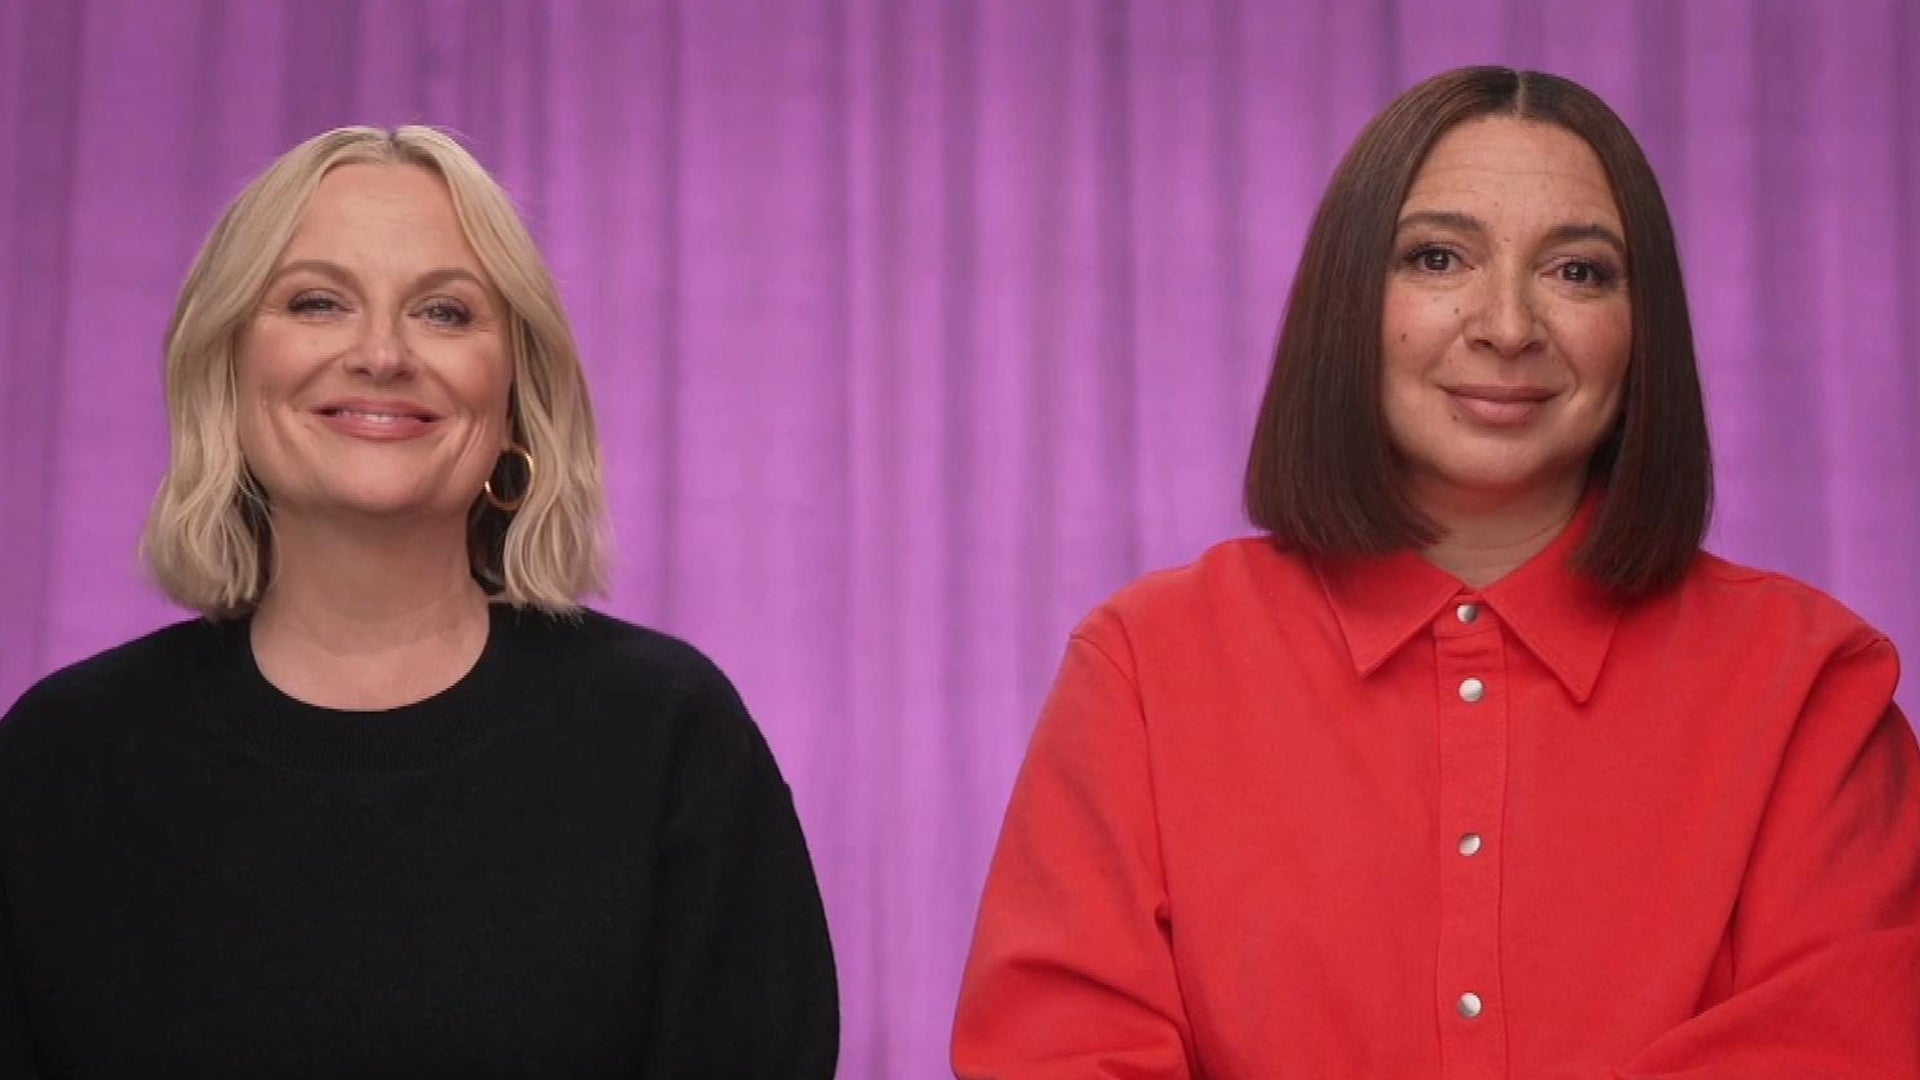 Amy Poehler and Maya Rudolph on Reuniting for ‘Baking It’ Season 2 (Exclusive)